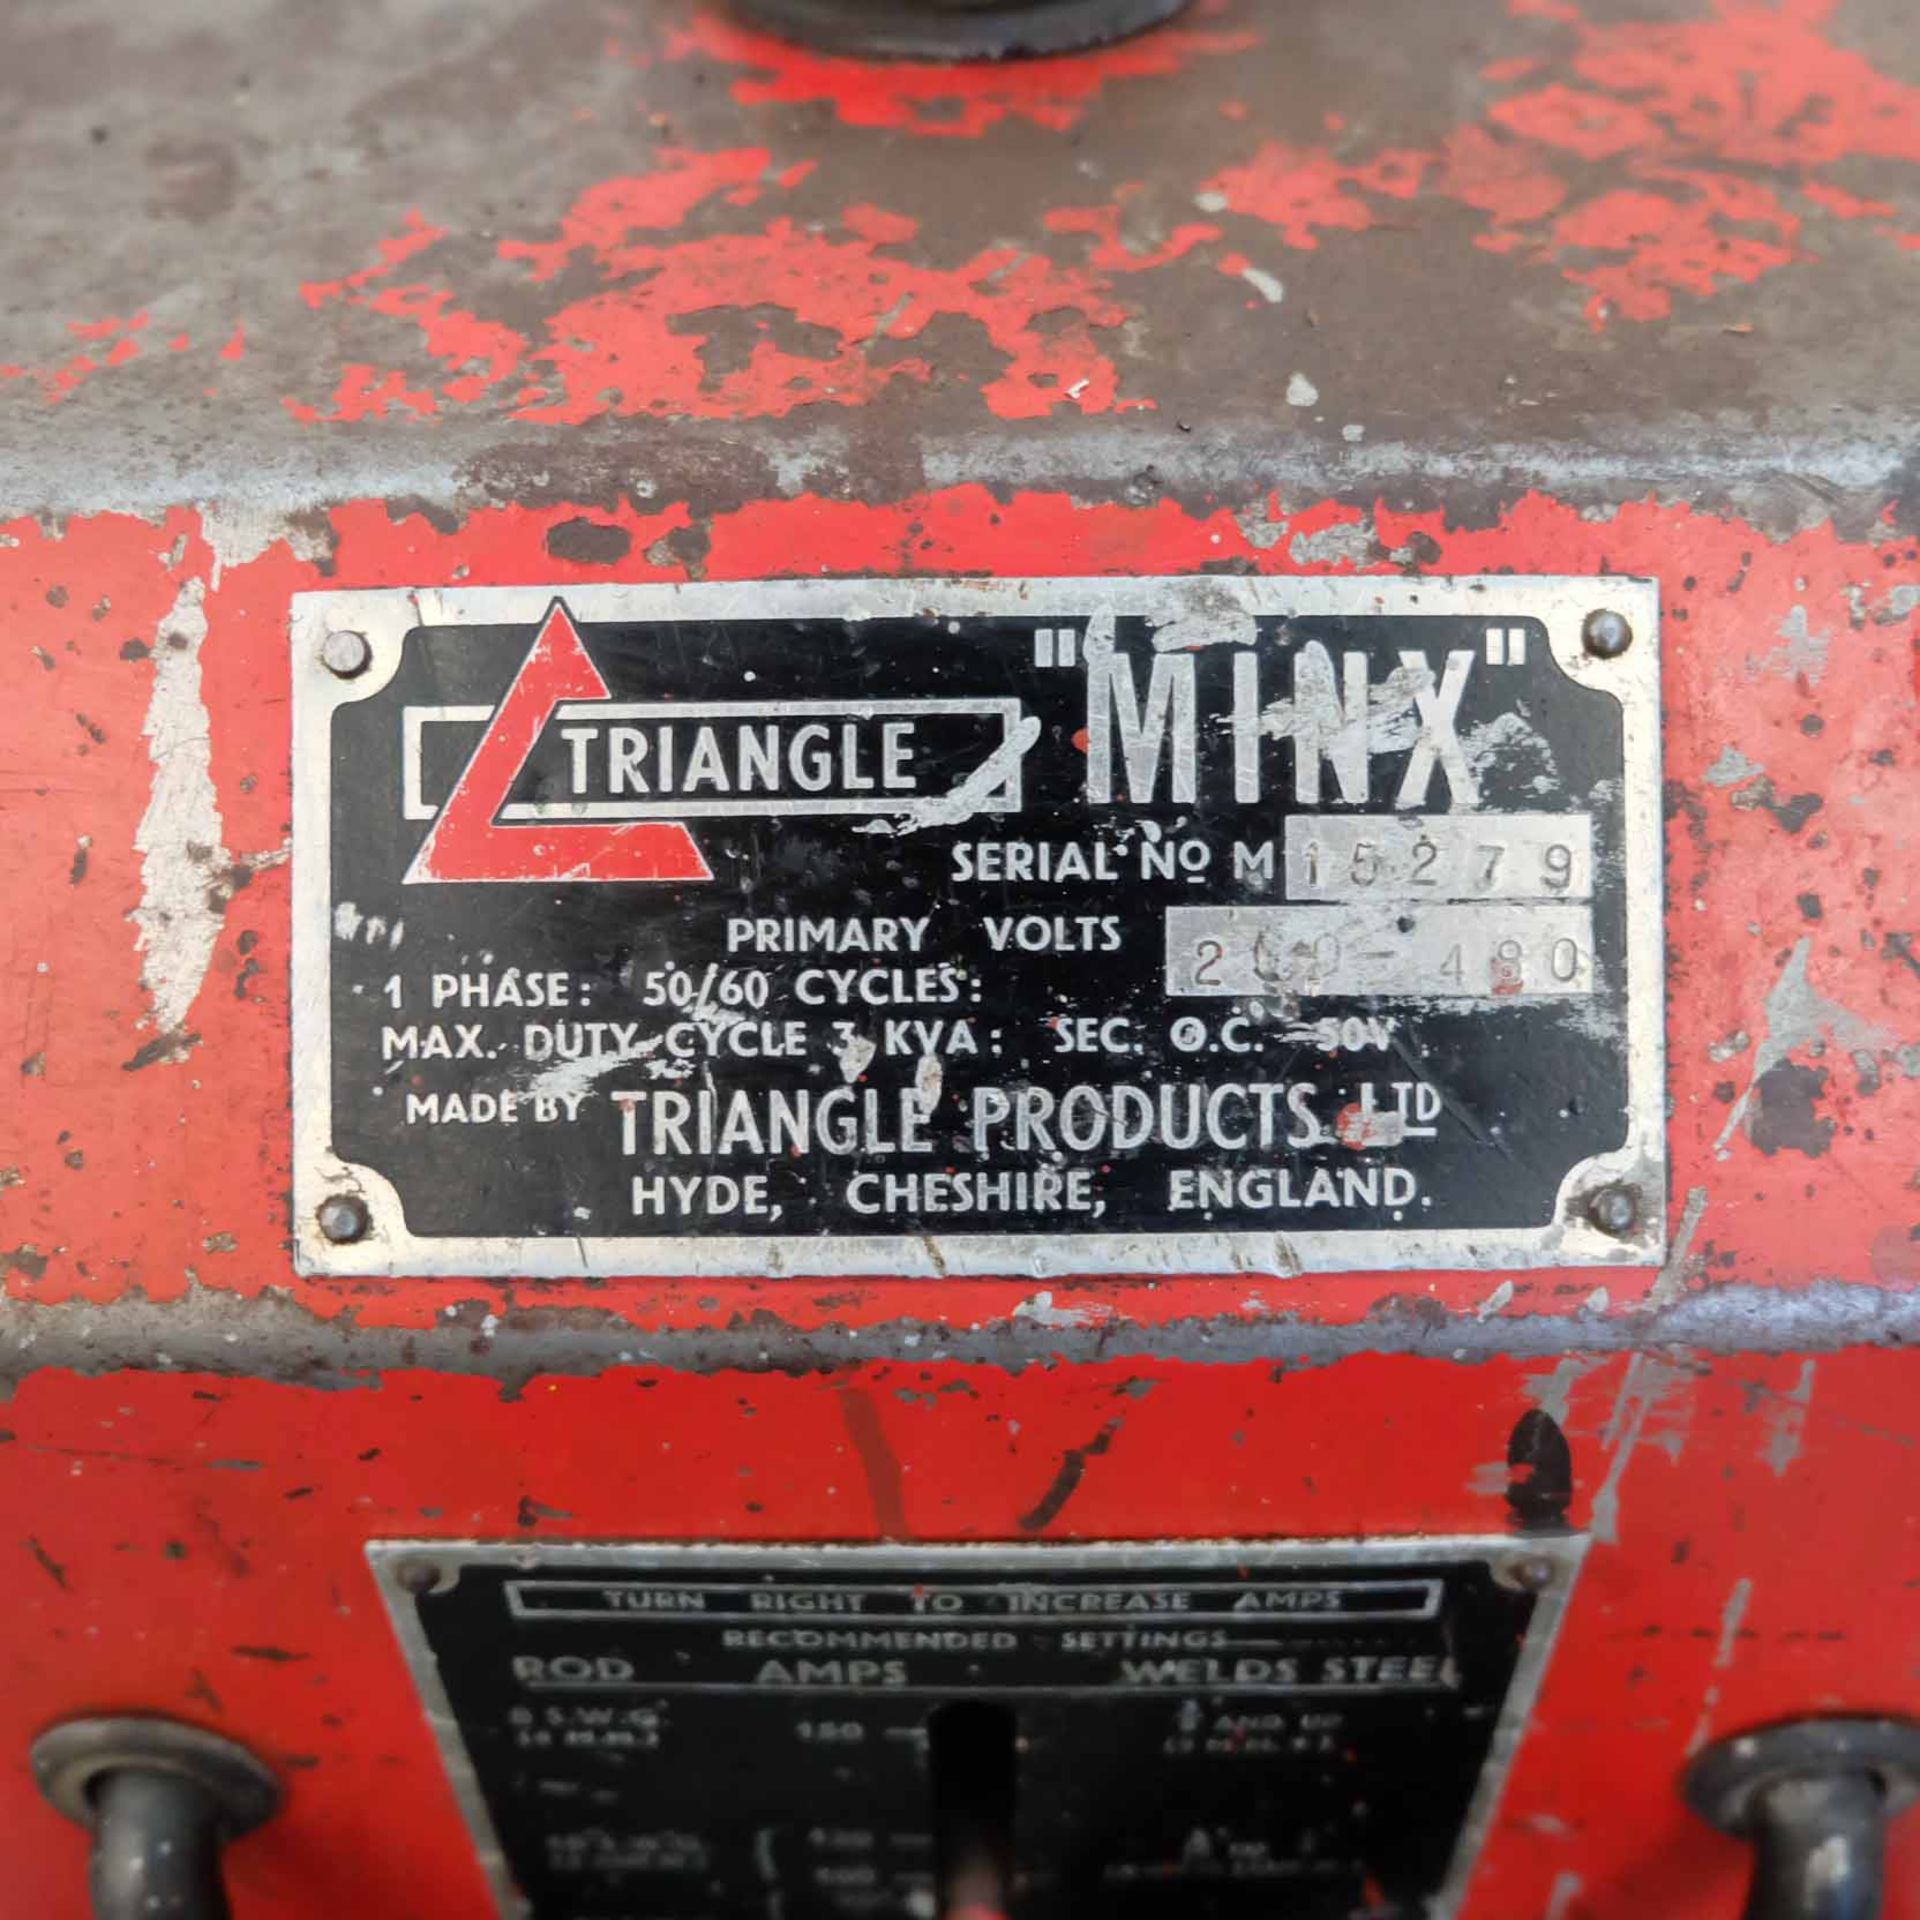 Triangle 'Minx' 1 Phase Stick Welder. Range 30 - 50Amps. Max Duty Cycle 3KVA. Primary Volts 200 - 48 - Image 6 of 7